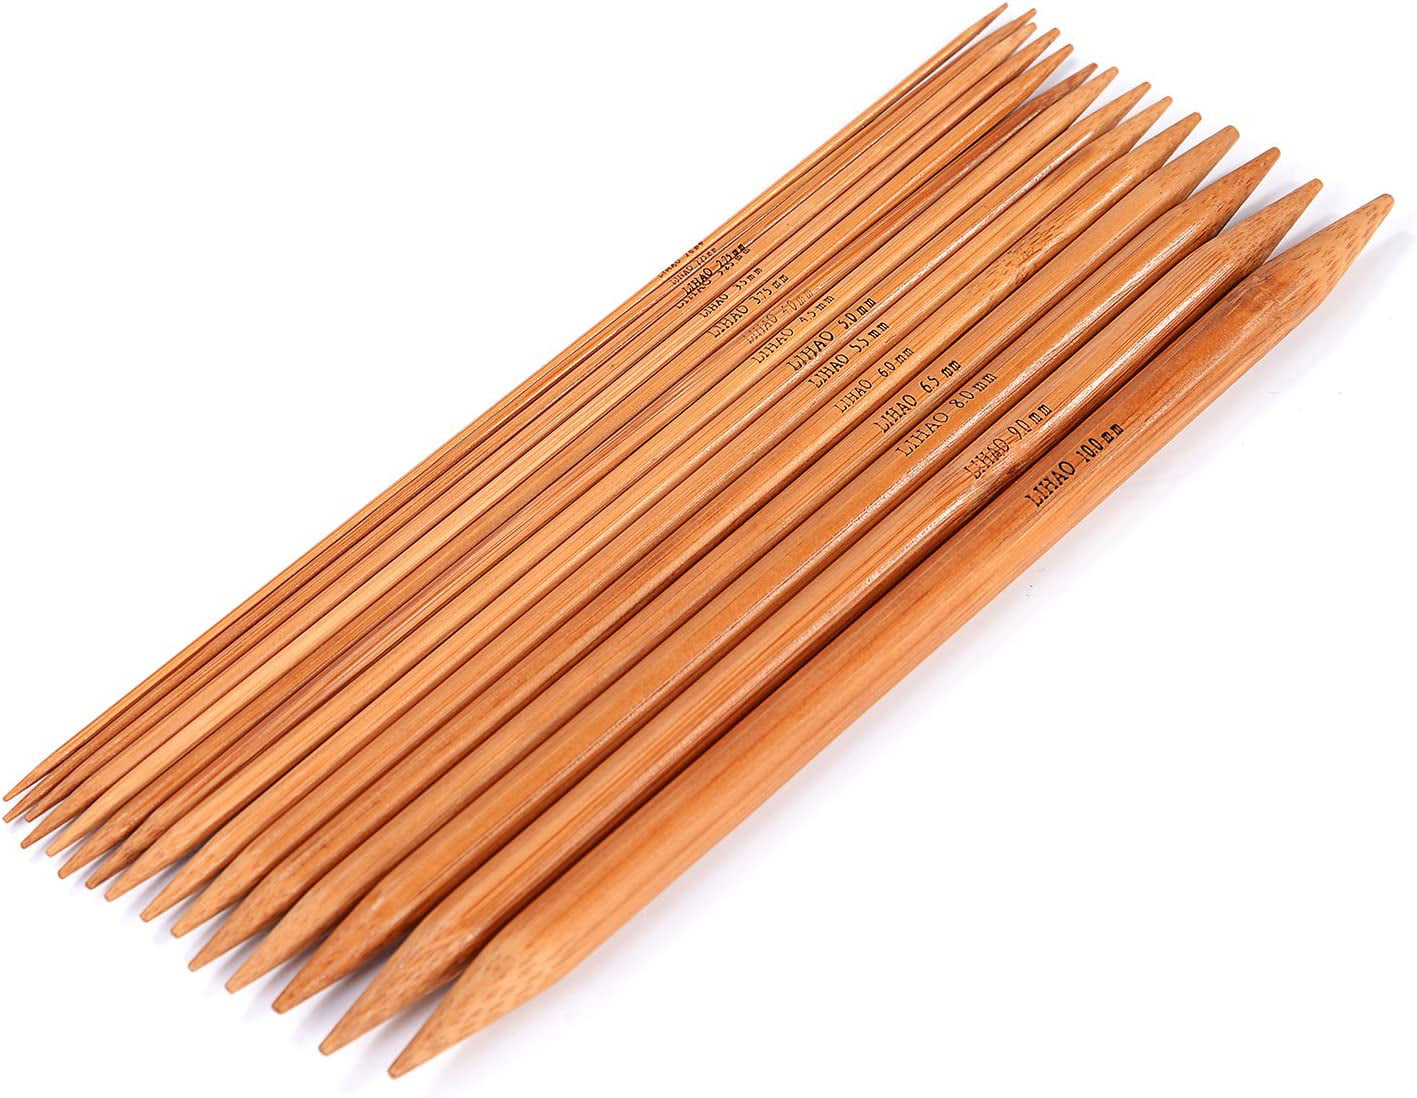 Exquiss Bamboo Knitting Needles Set,18 Pairs 18 Sizes Wooden Circular Knitting Needles with Colored Tube & 36pcs 18 Sizes Single Pointed Bamboo